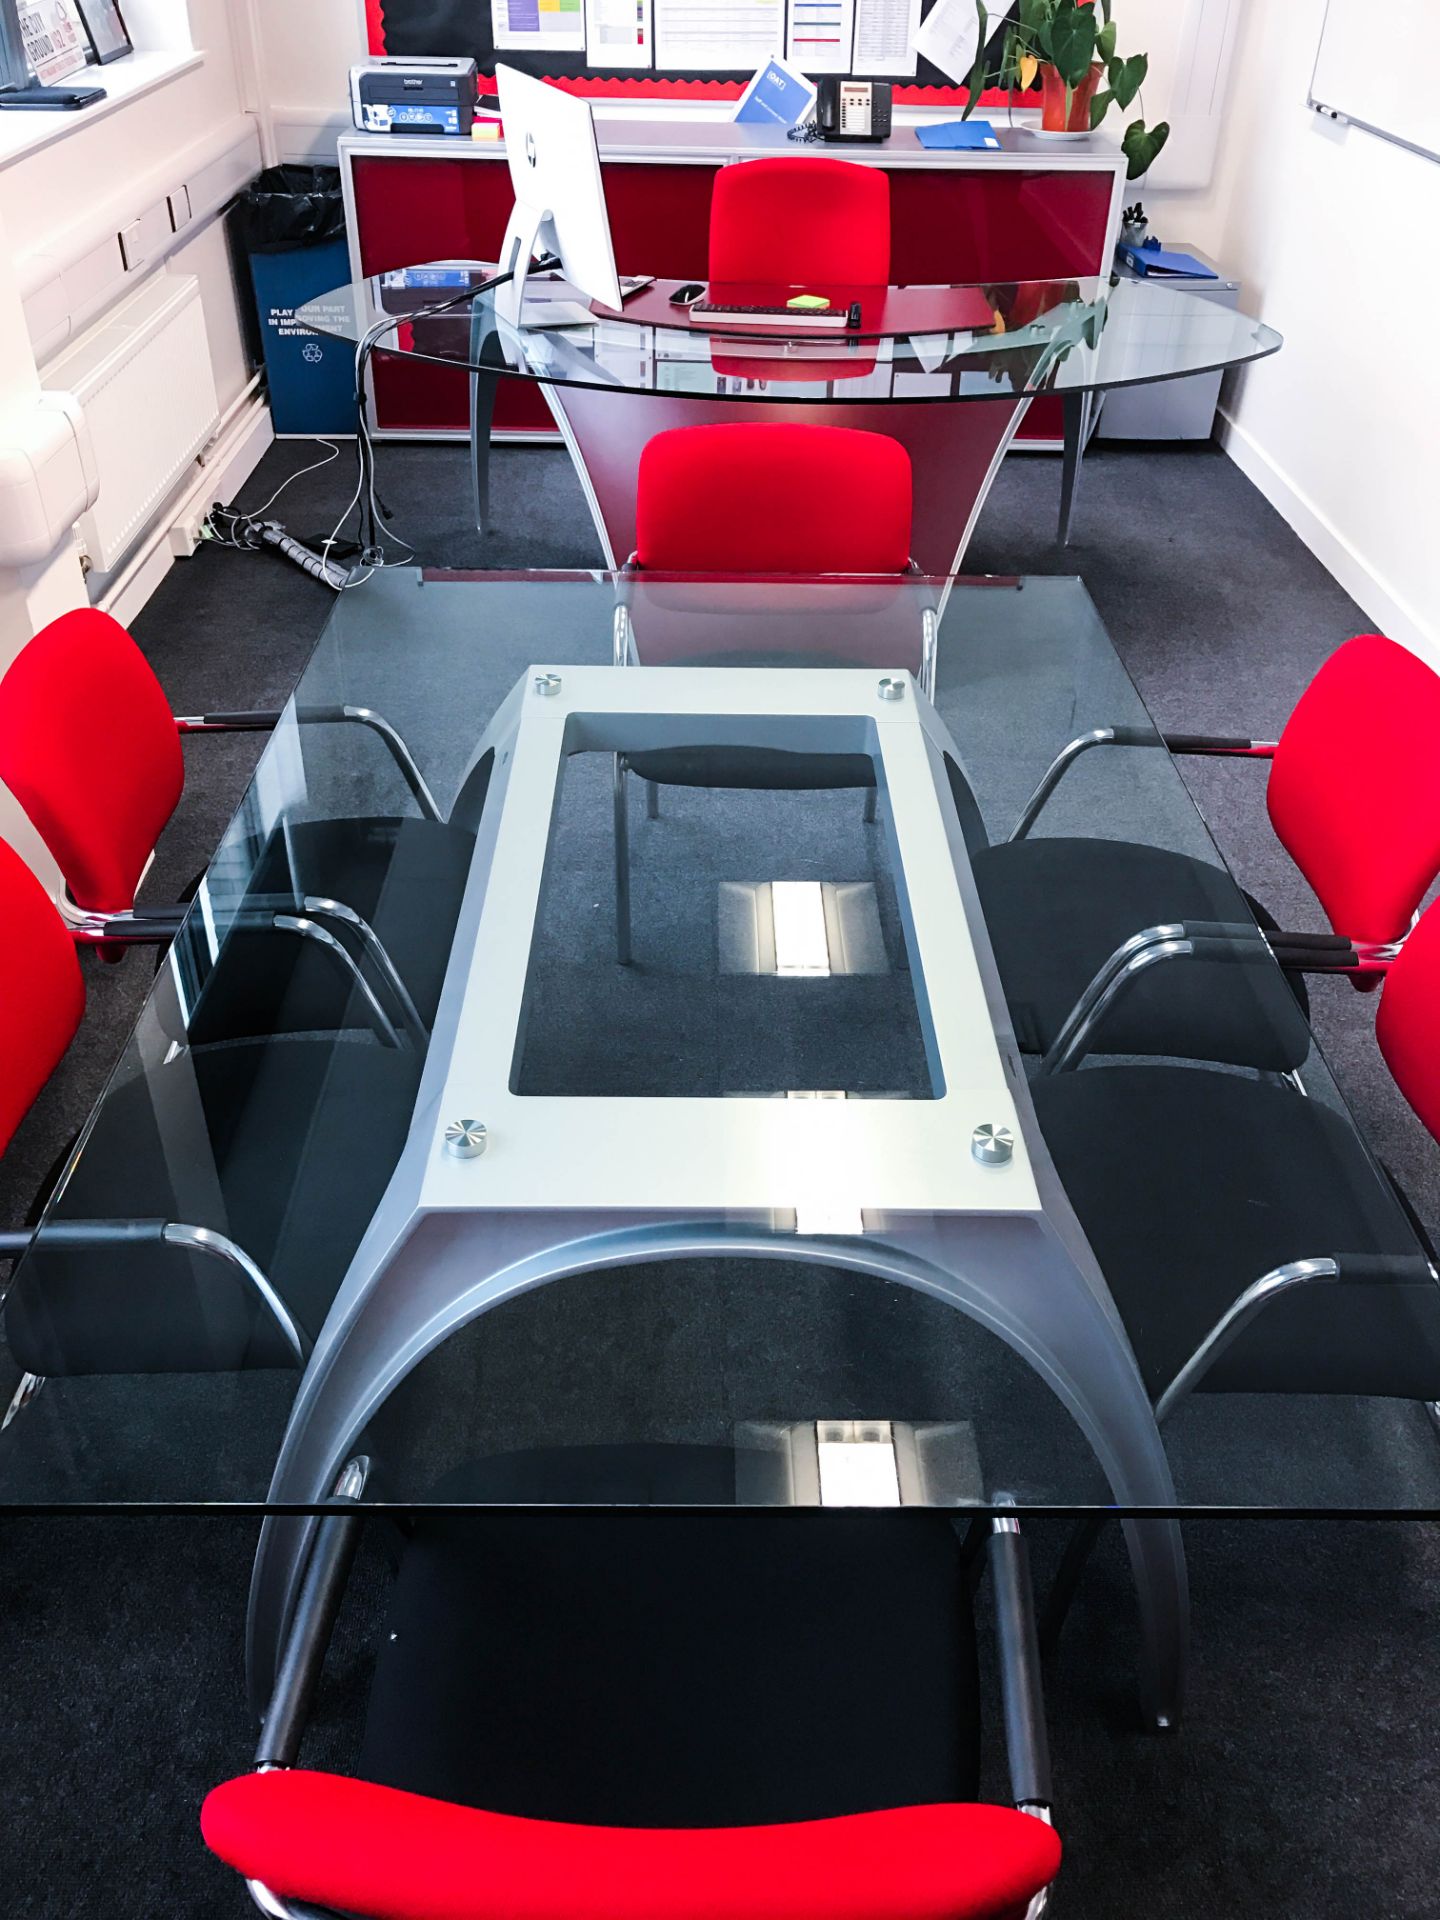 Meeting/Conference table designed by the Italian Ferrari designer Pininfarina and made by Uffix. - Image 9 of 12